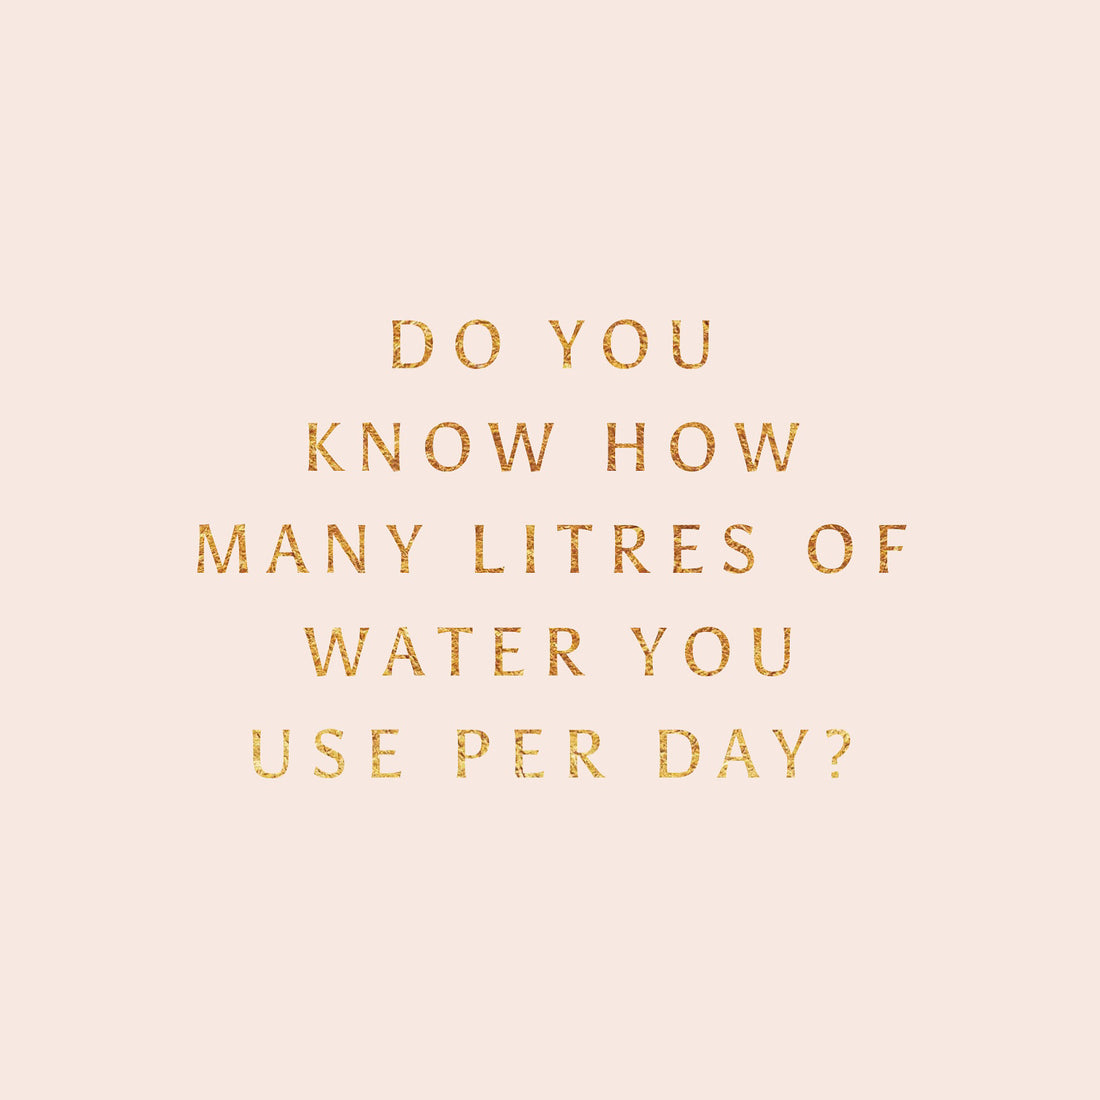 Do you know how many litres of water you use per day?